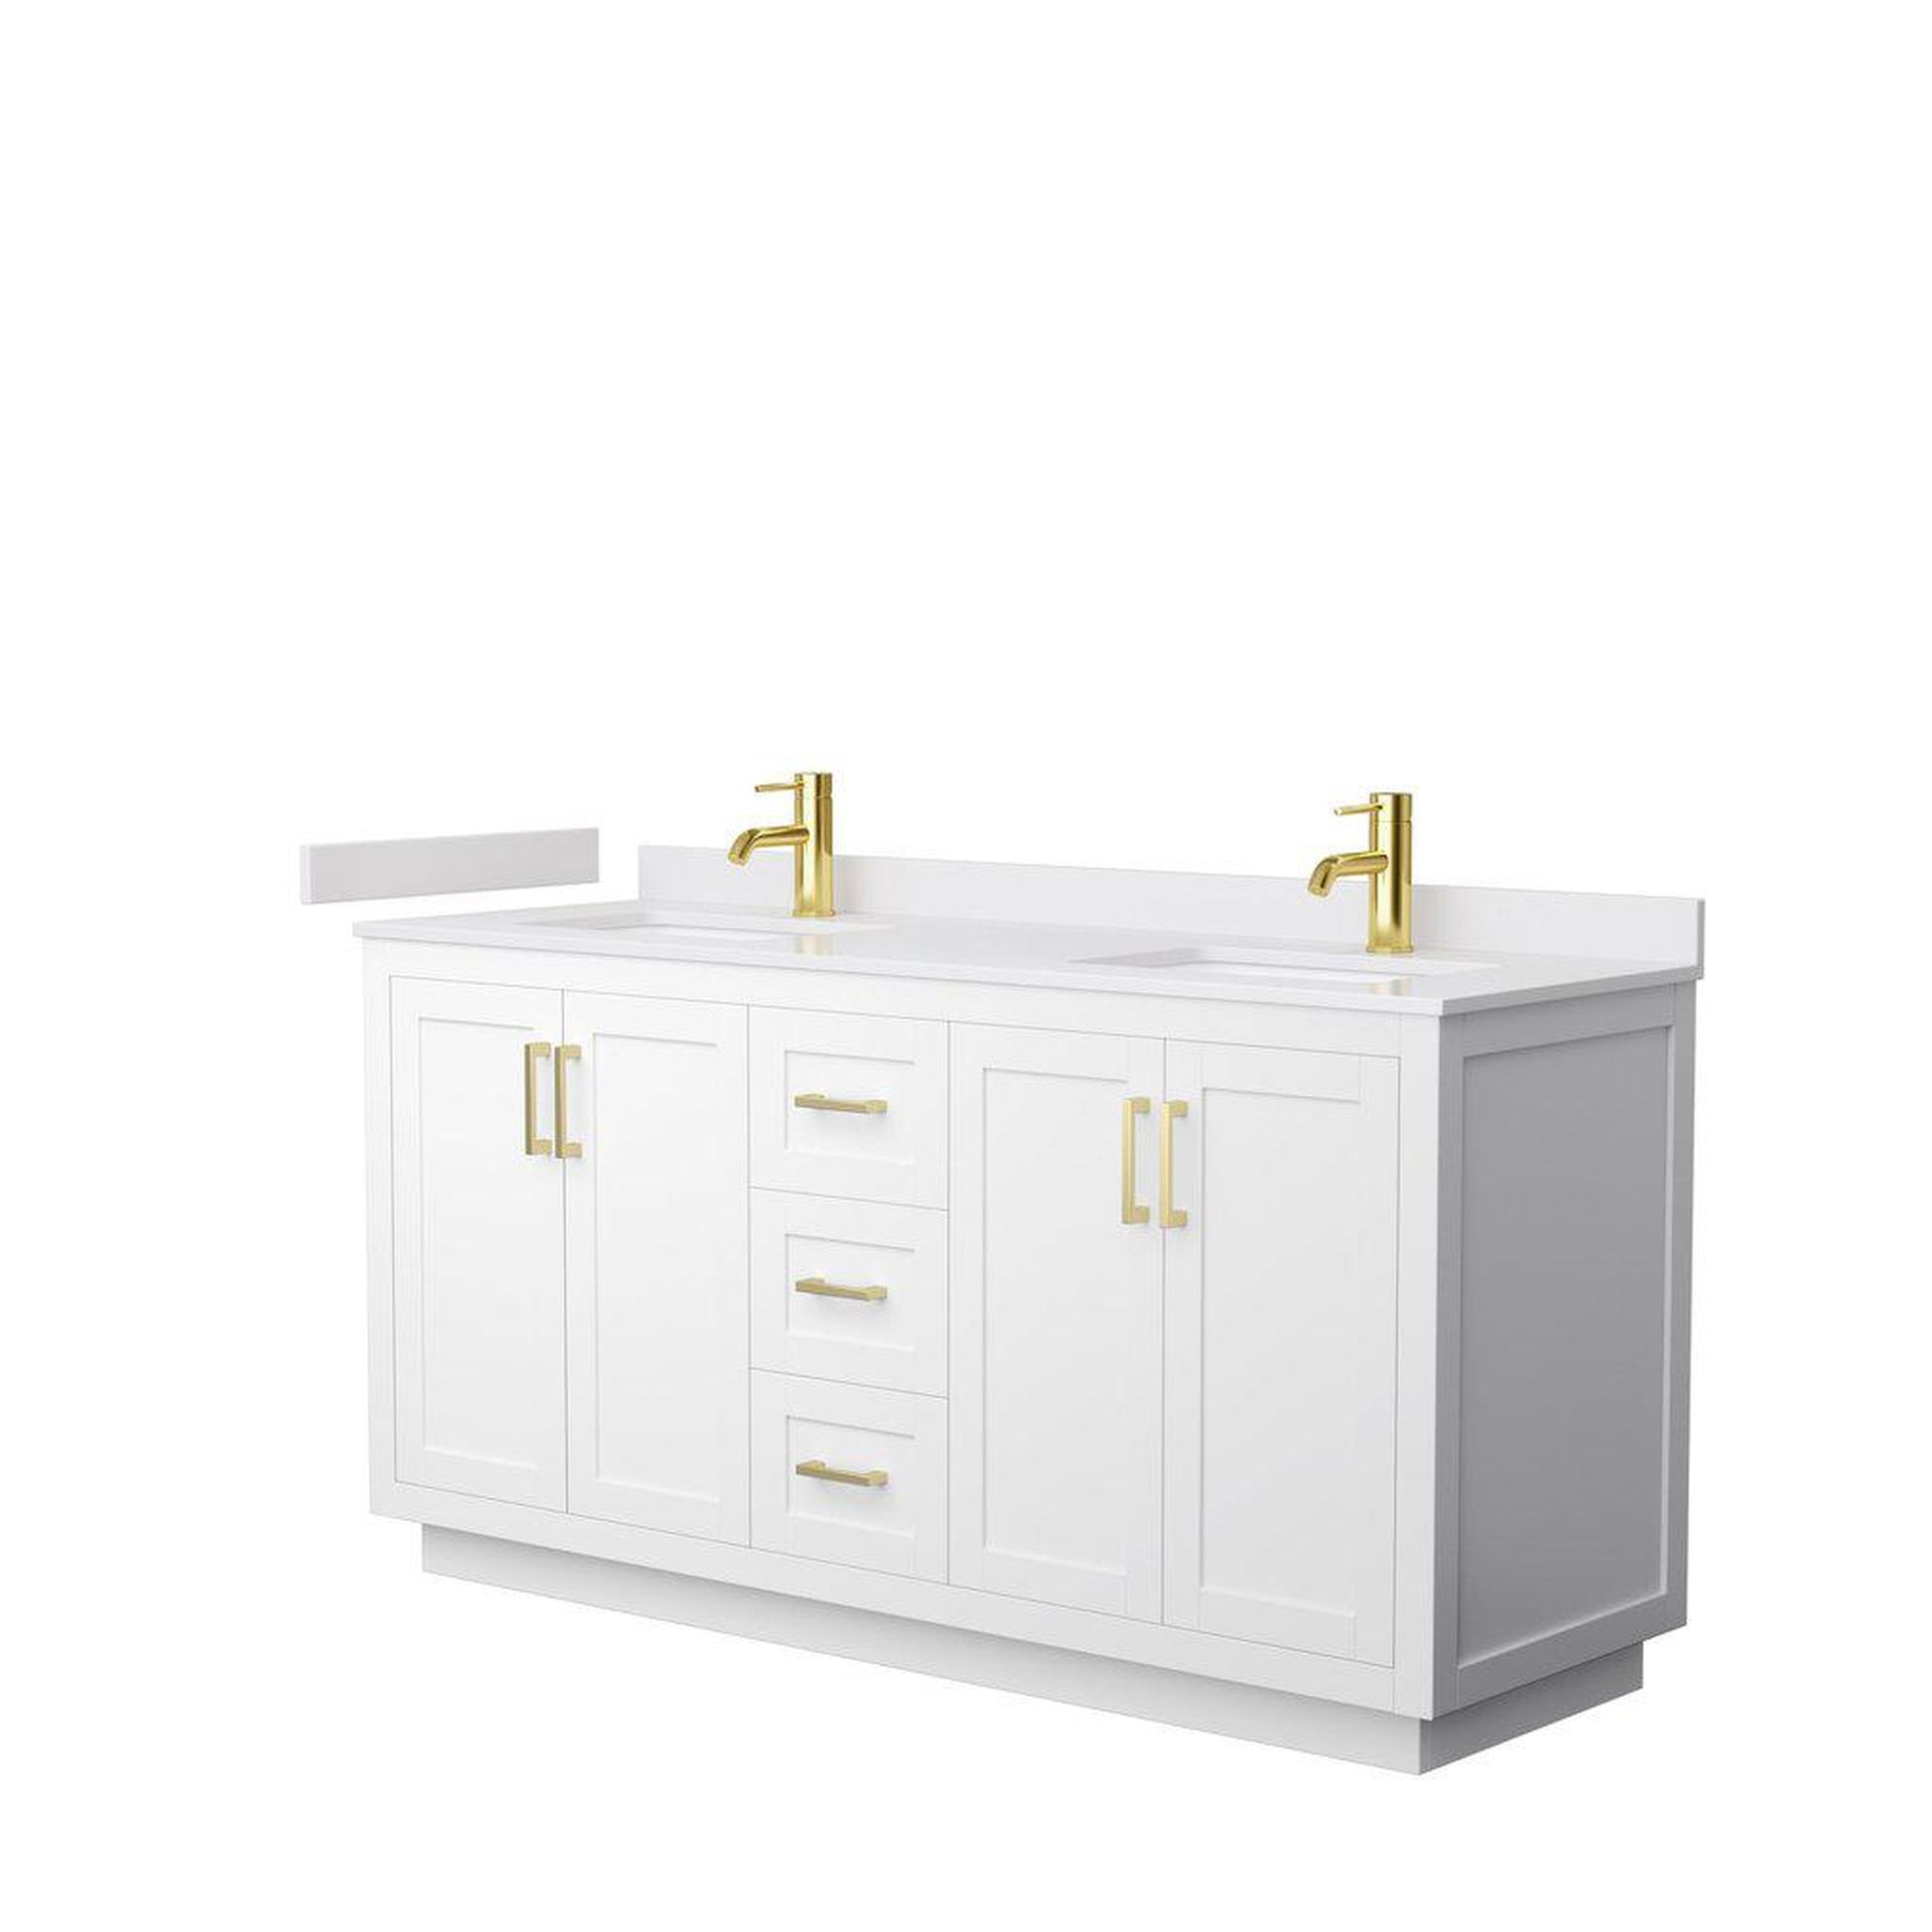 Wyndham Collection Miranda 66" Double Bathroom White Vanity Set With White Cultured Marble Countertop, Undermount Square Sink, And Brushed Gold Trim